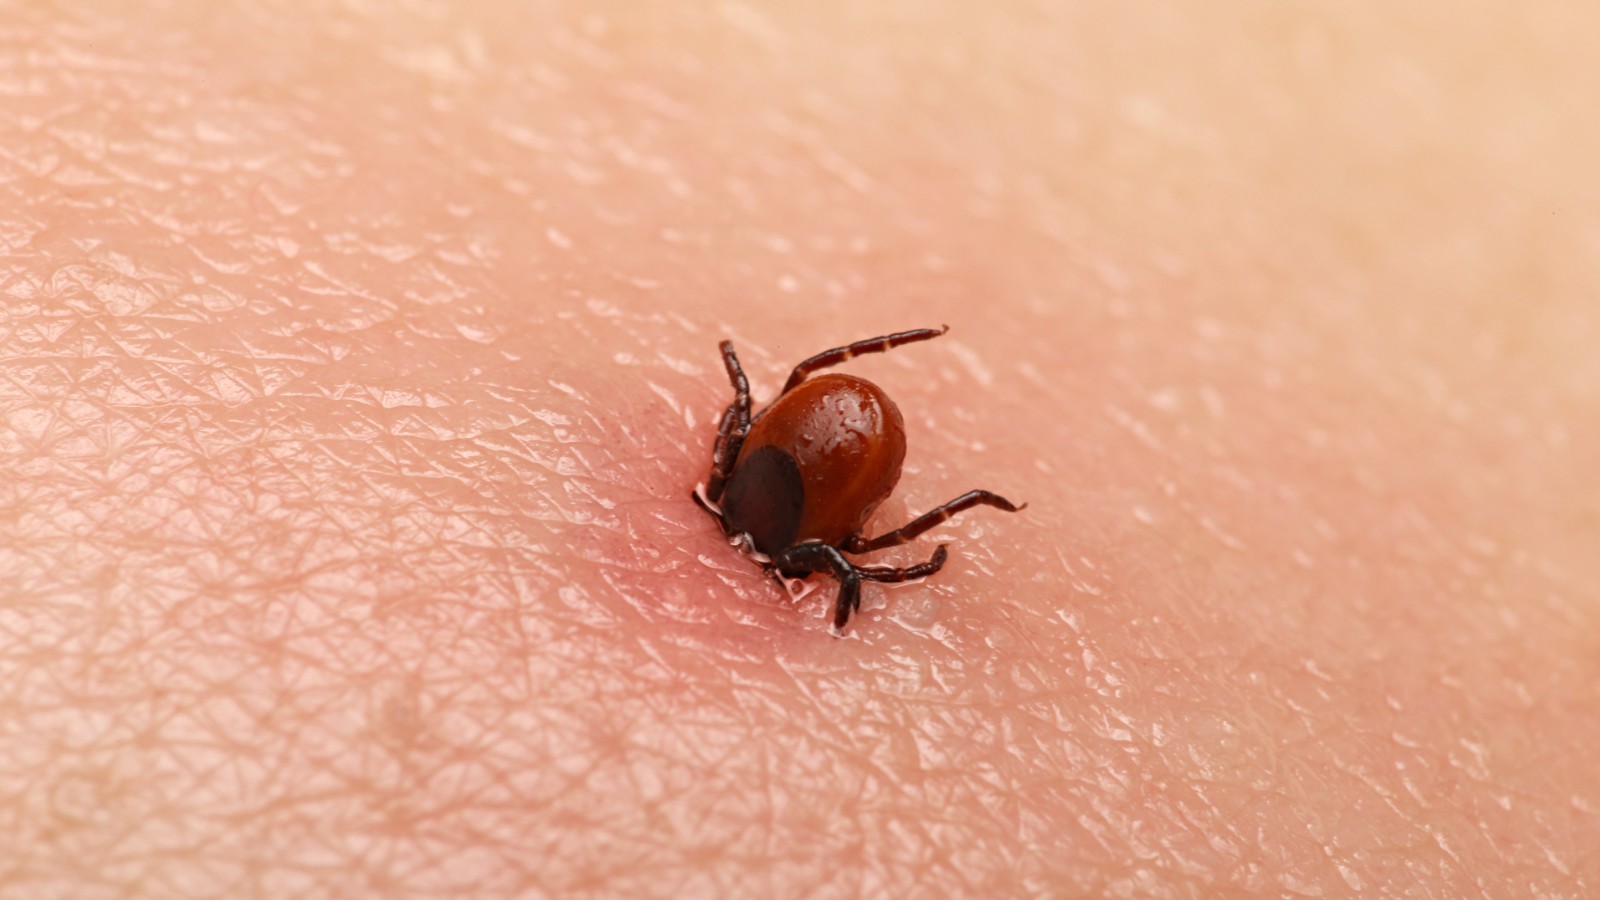 A close-up of a tick with its head embedded in human skin